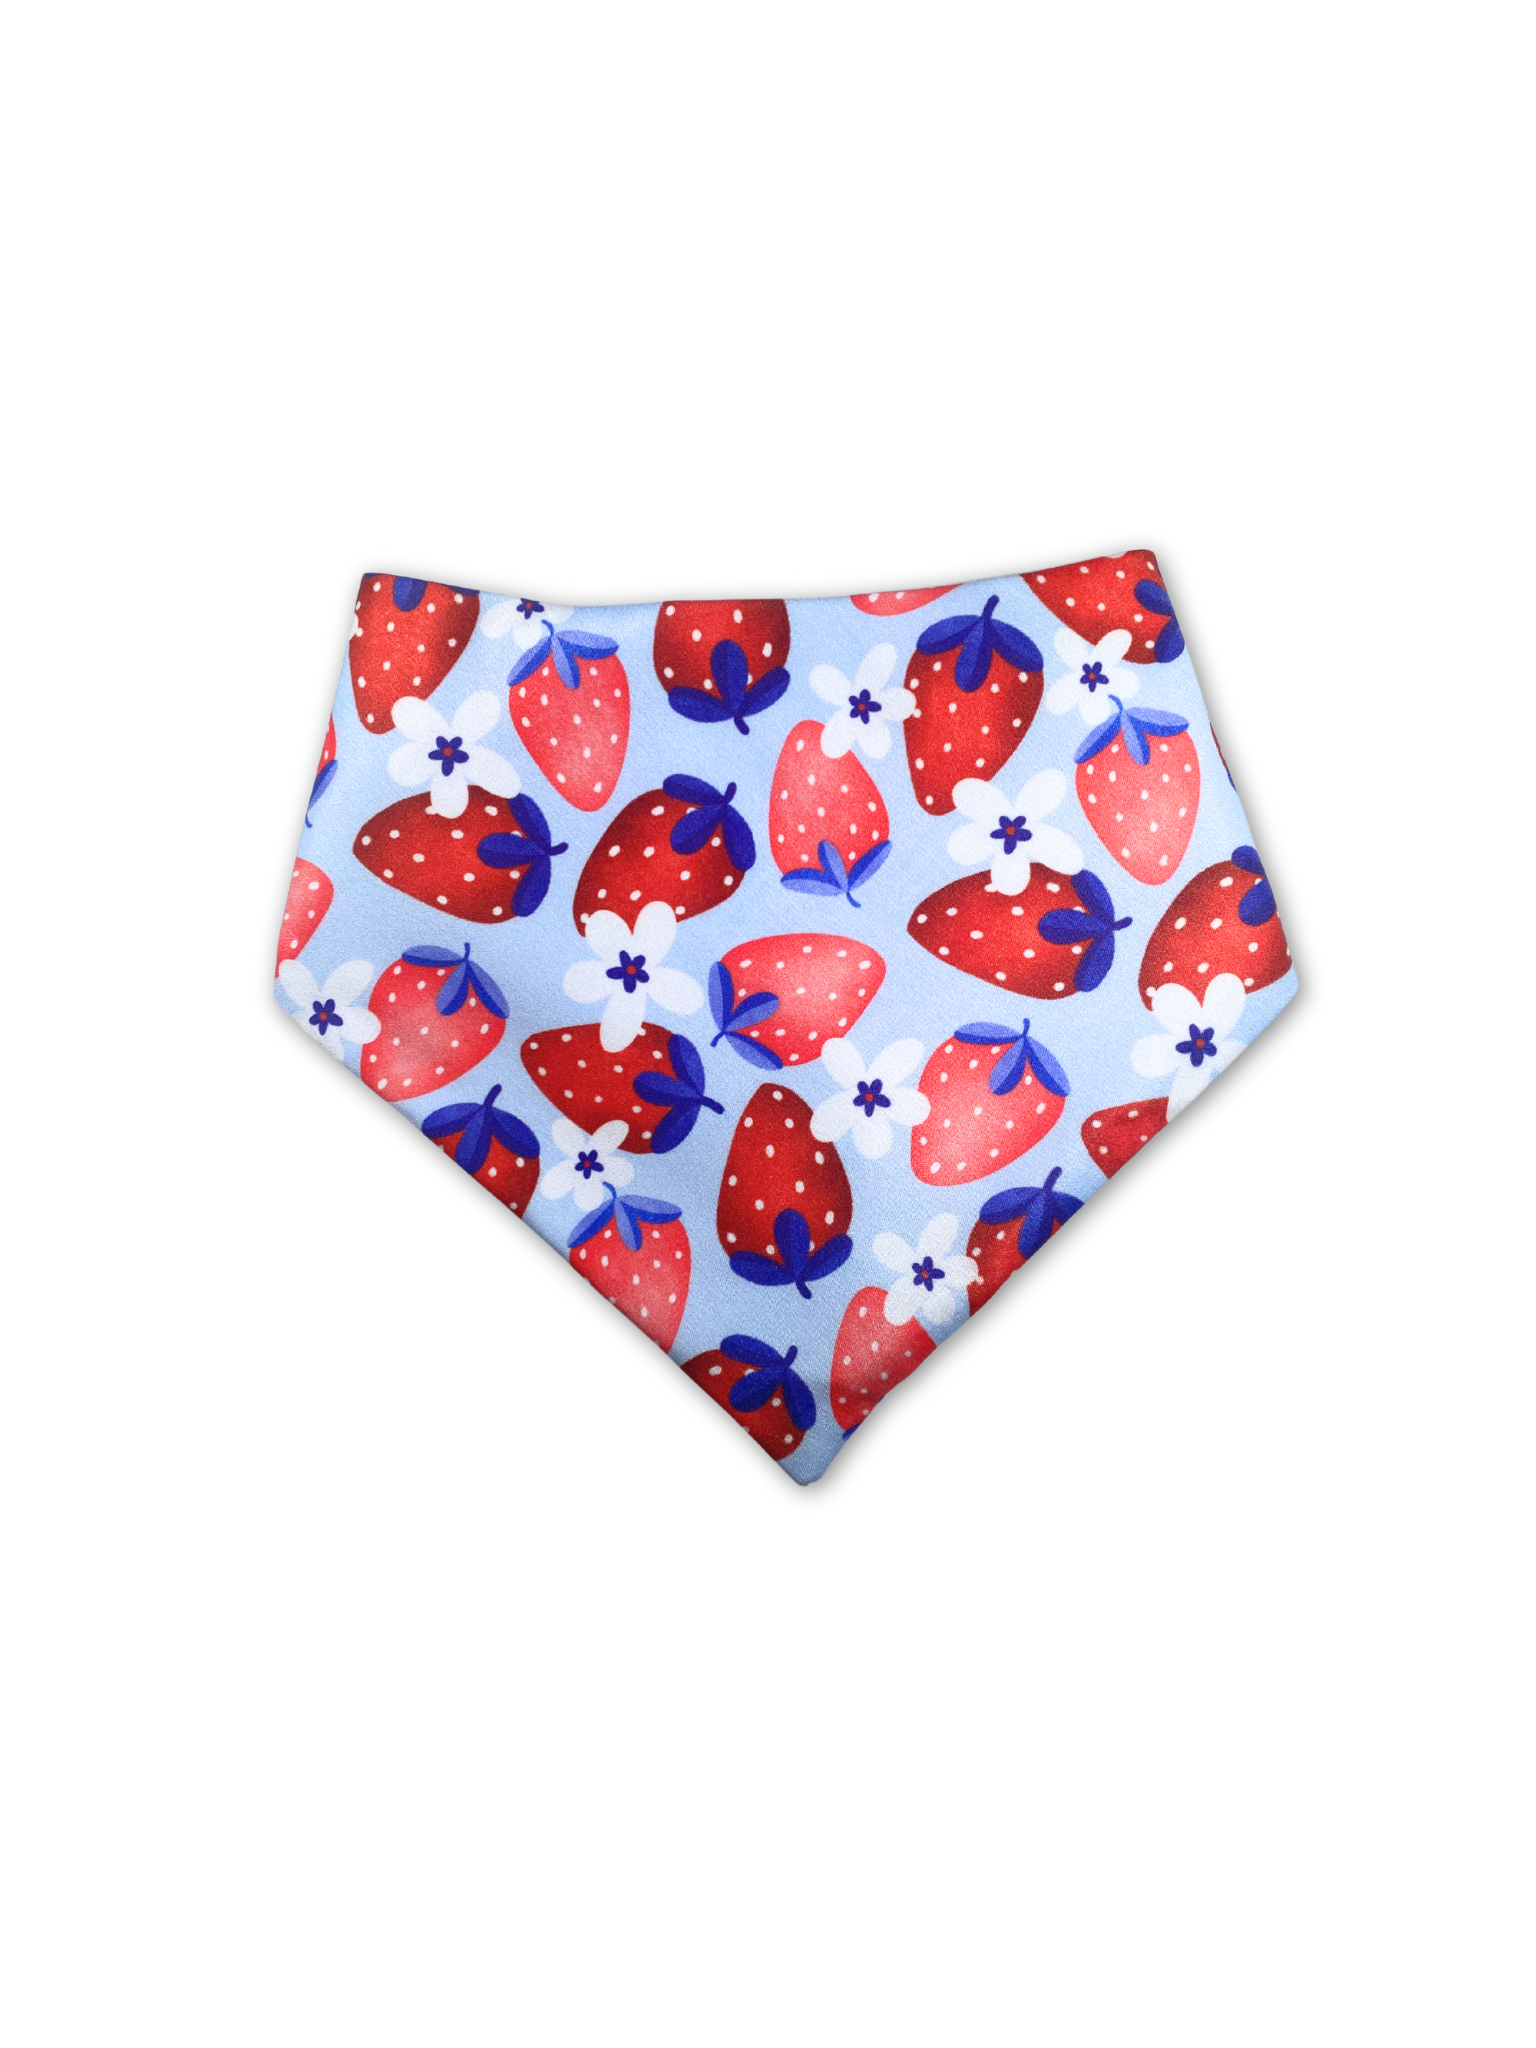 Festive strawberry print dog bandana in Memorial Day colors, featuring red, white, and blue hues. This bandana is paw-fect for patriotic pooches and will make your furry friend the star of any summer celebration.